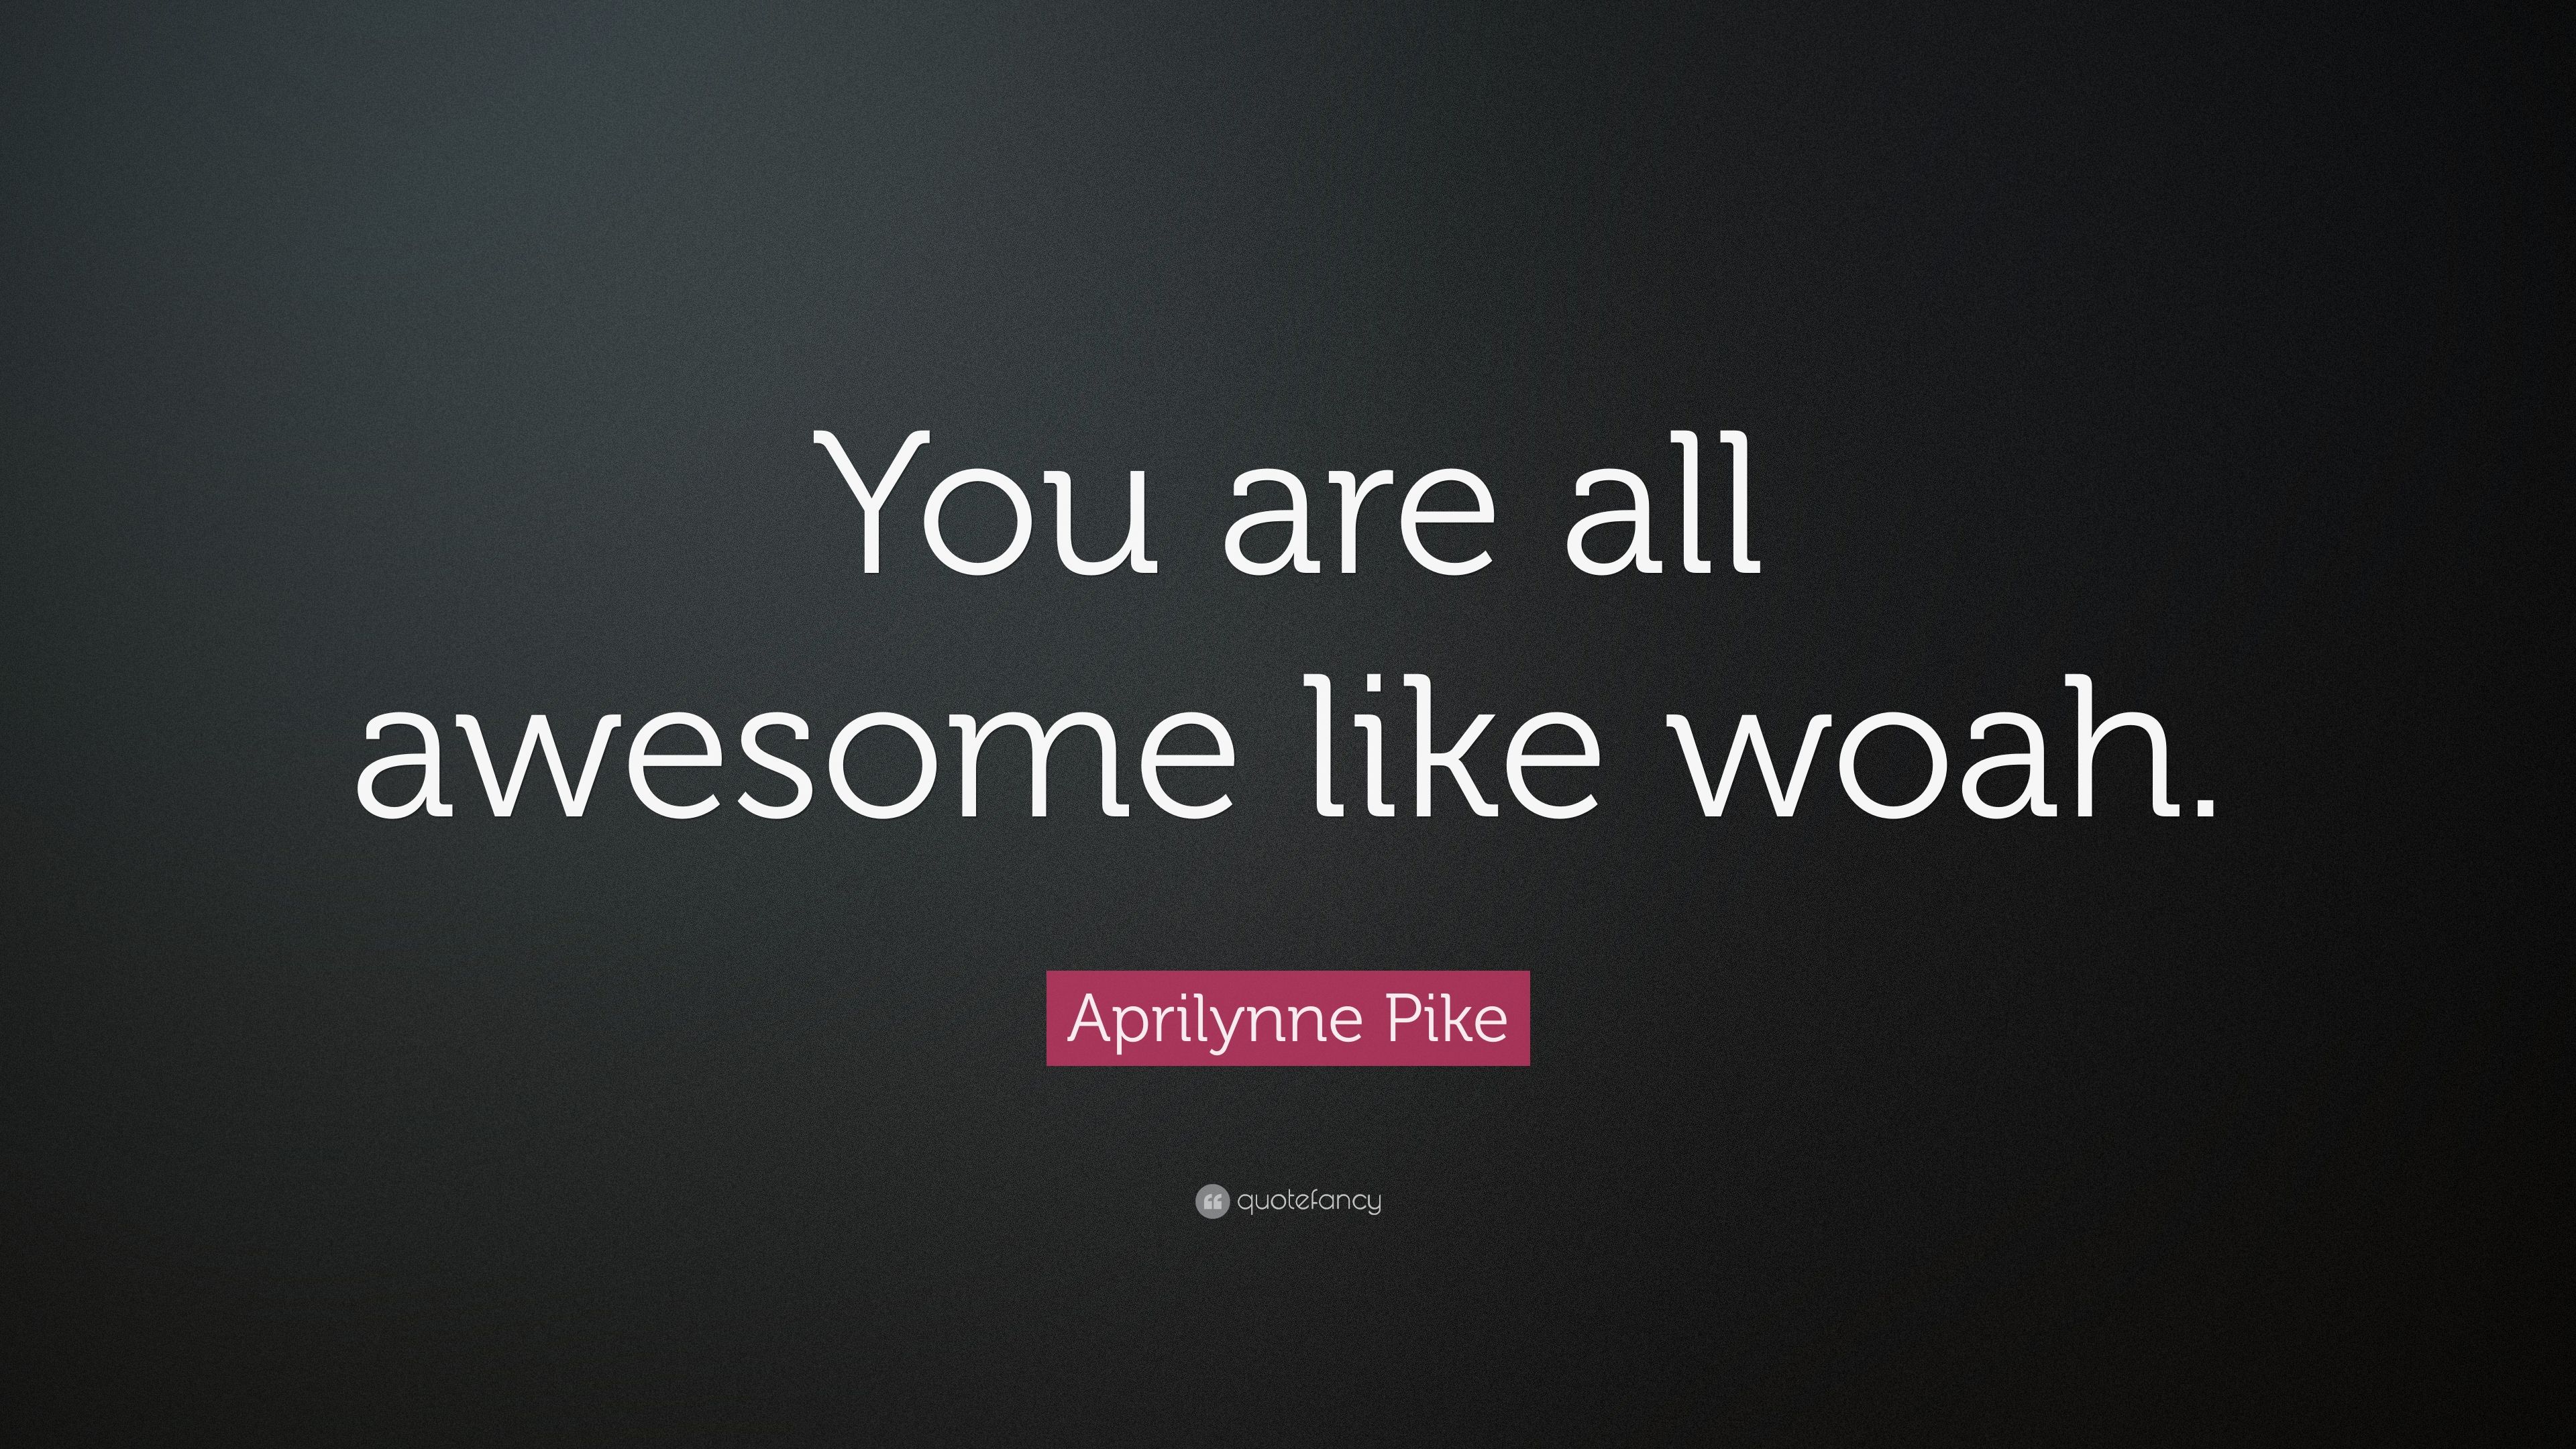 Aprilynne Pike Quote: “You are all awesome like woah.” 7